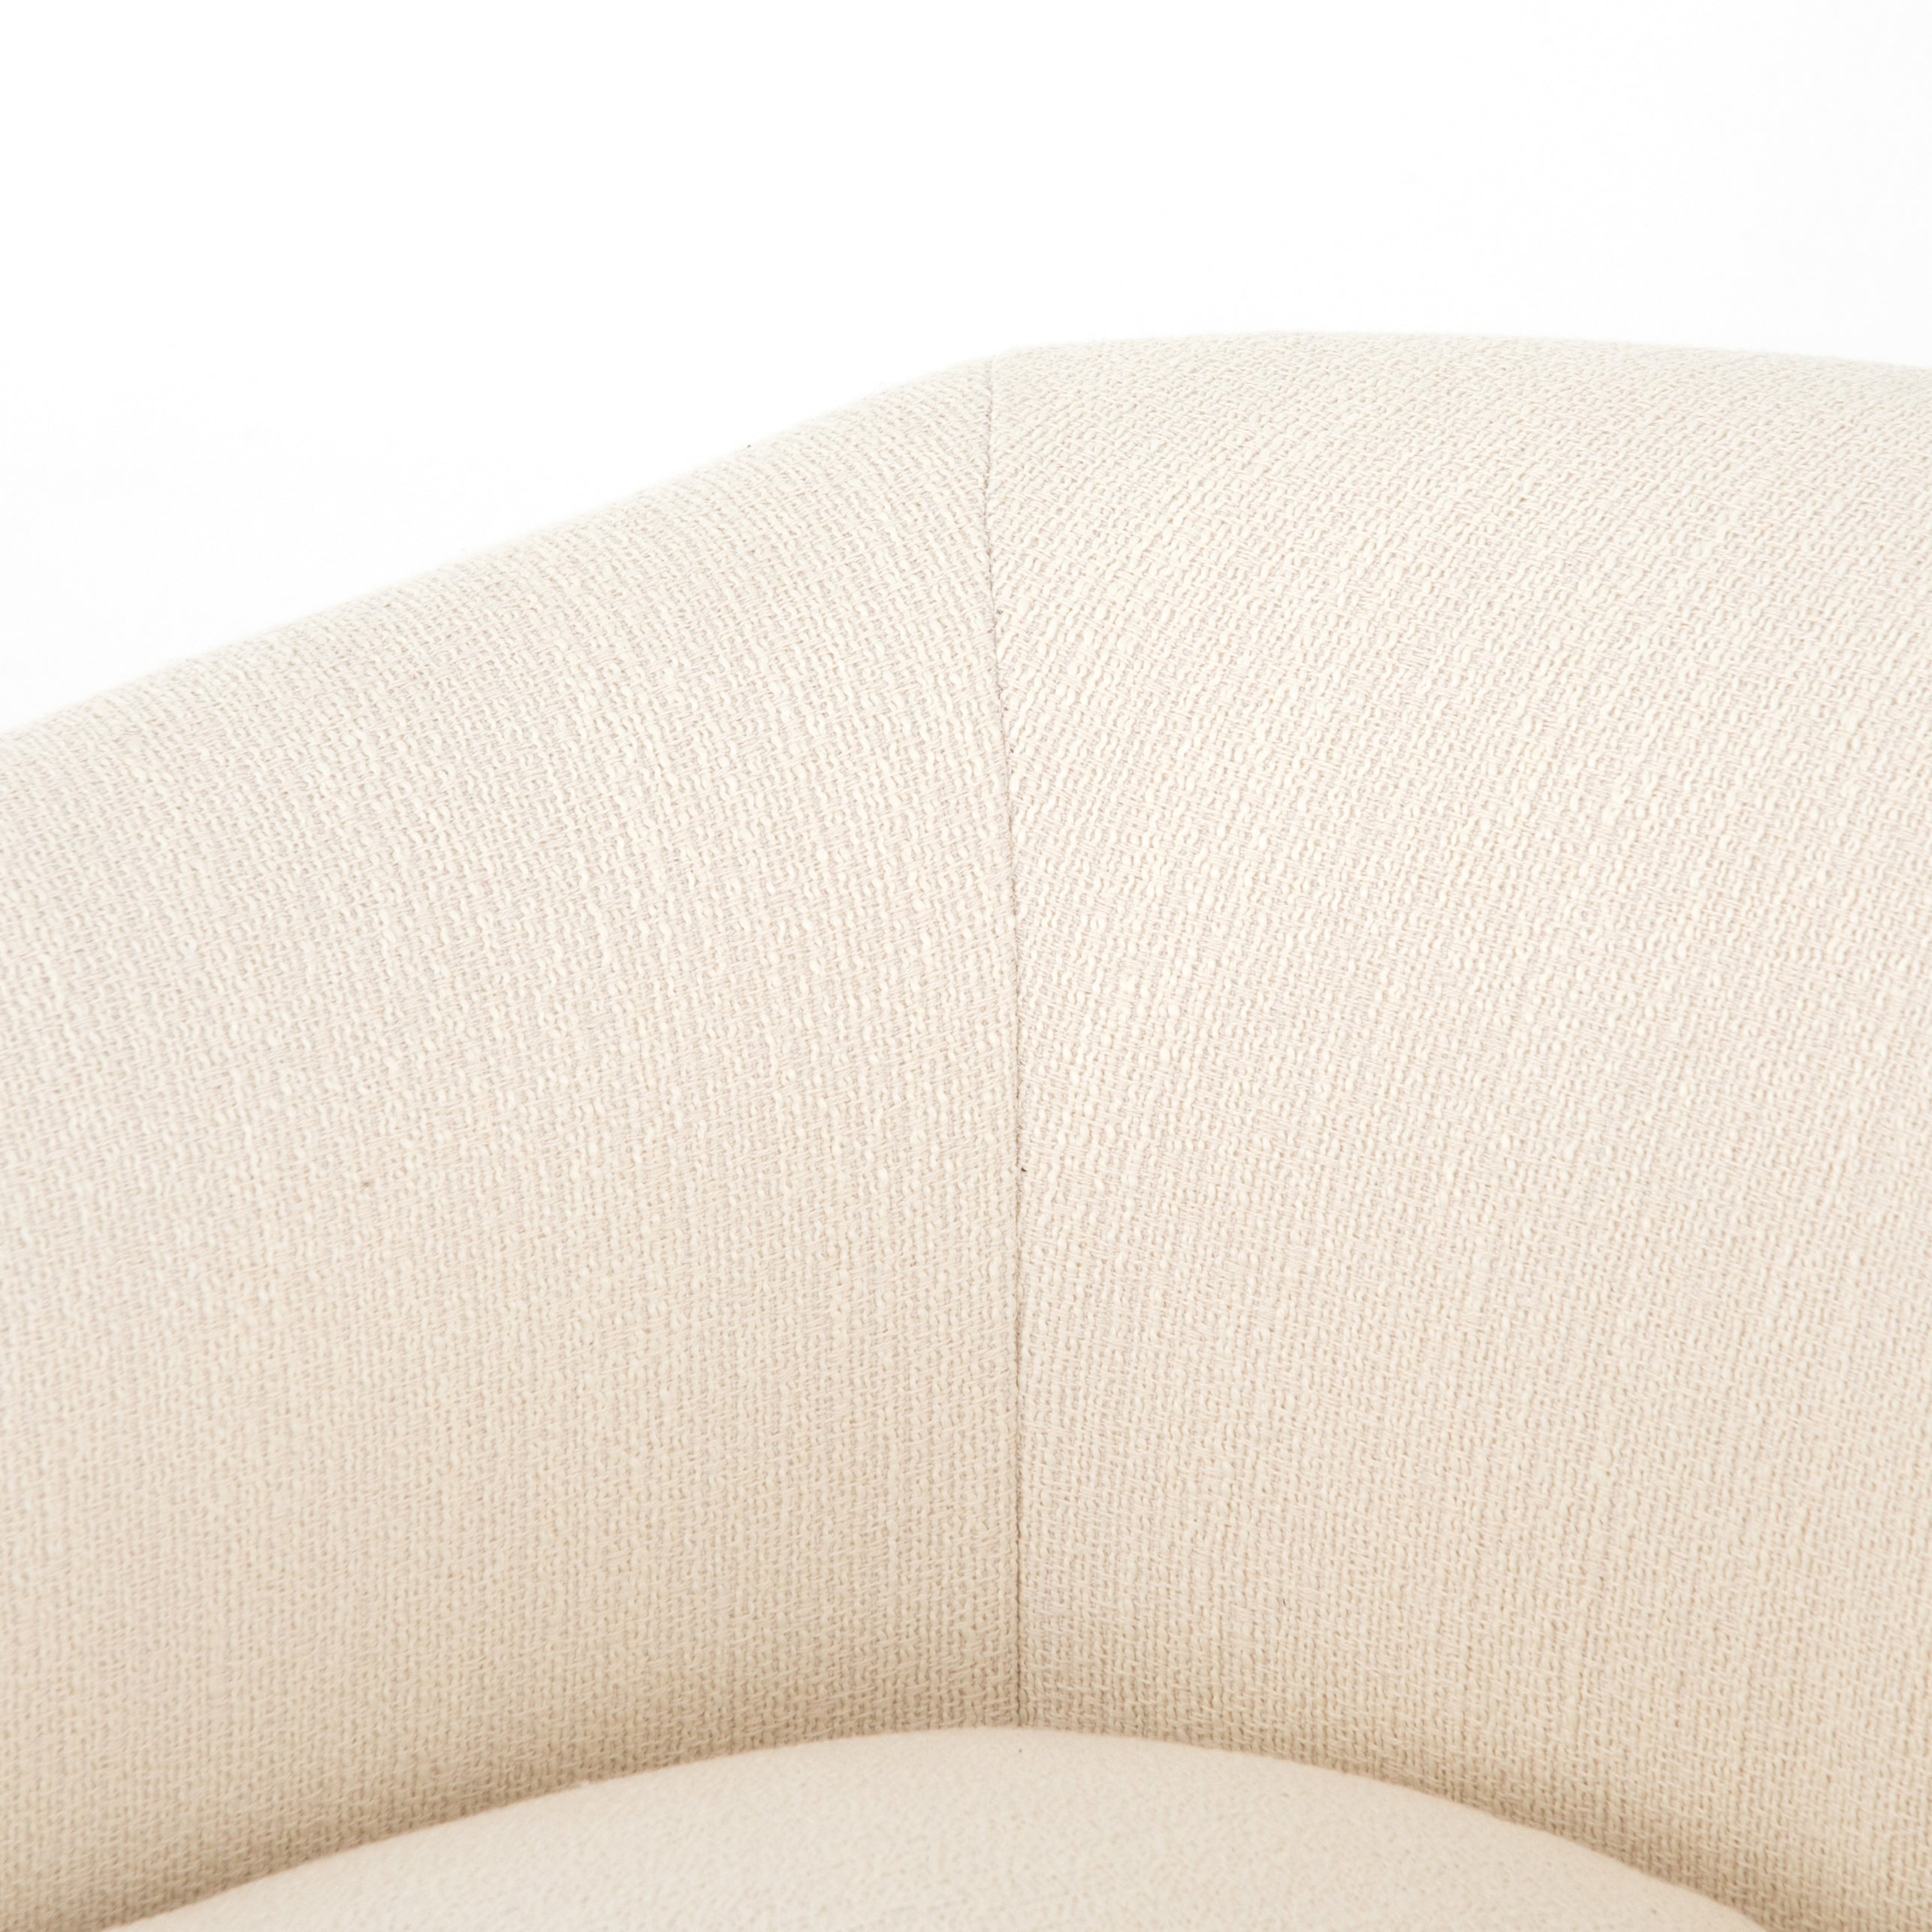 A fresh take on the traditional tub chair, this Lyla Chair - Kerbey Ivory has an exaggerated depth for drama and comfort. Solid rubberwood legs intersect ivory upholstery for clean contrast of color and scale. A comfy, gorgeous chair to add to any living room, office, or other space.   Overall Dimensions: 38.00"w x 33.00"d x 28.00"h